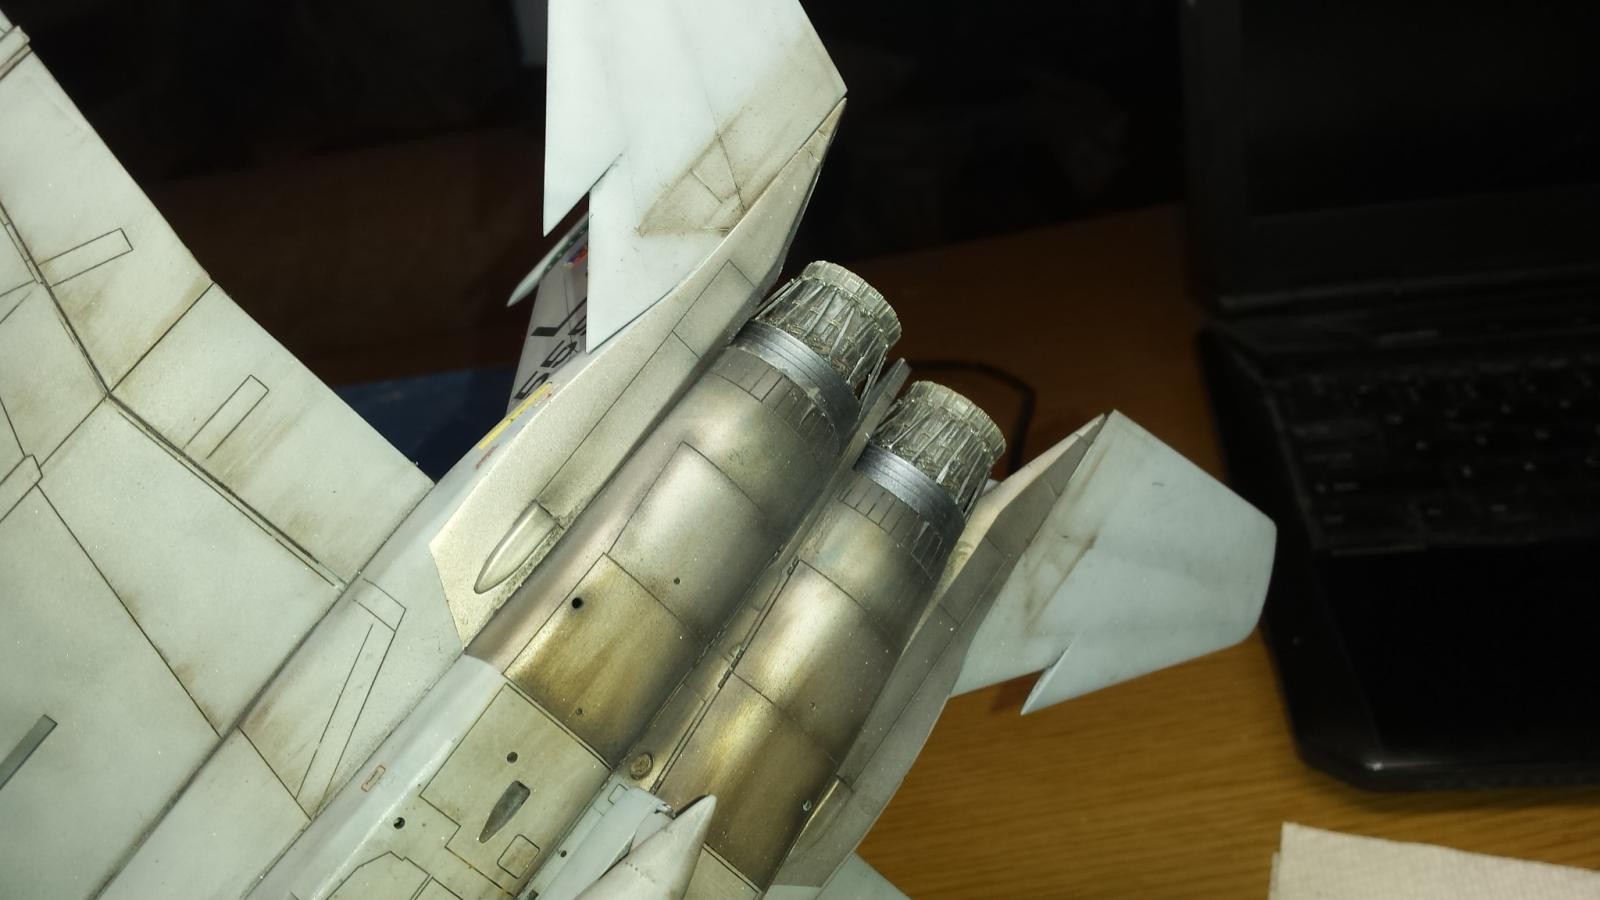 Aftermarket Exhaust Nozzle Build Review: 1/48 ARIES F-15 Exhaust